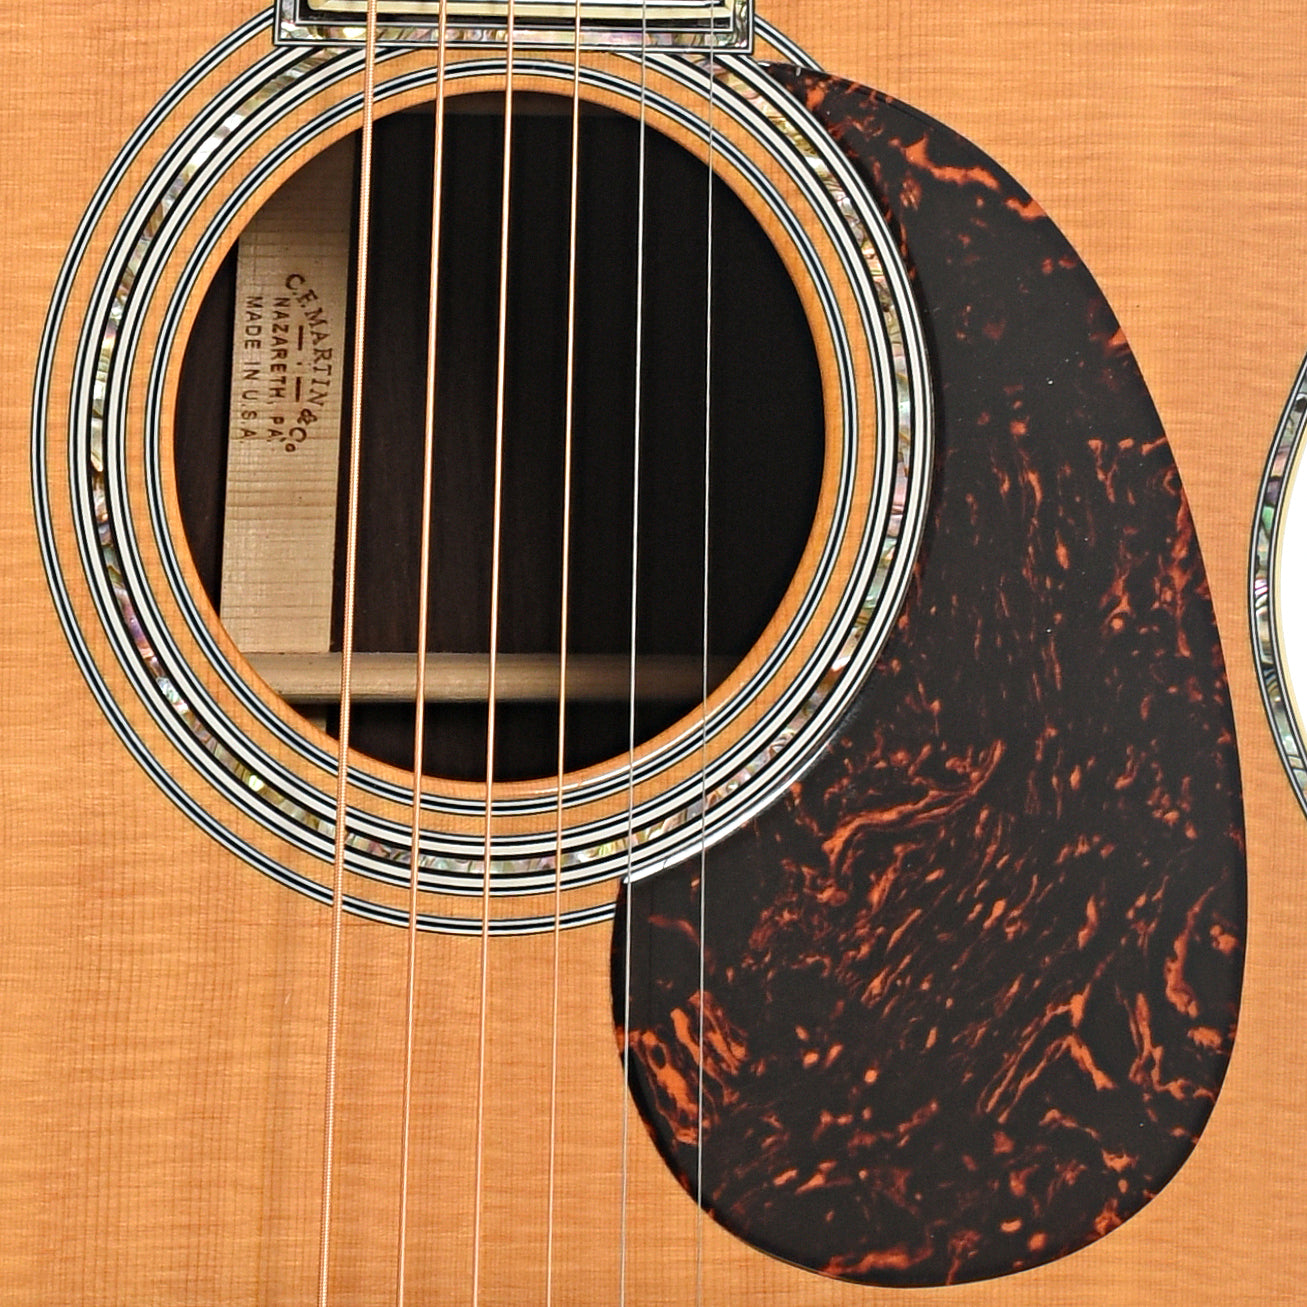 soundhole and pickguard of Martin 000-42 Acoustic Guitar (2004)